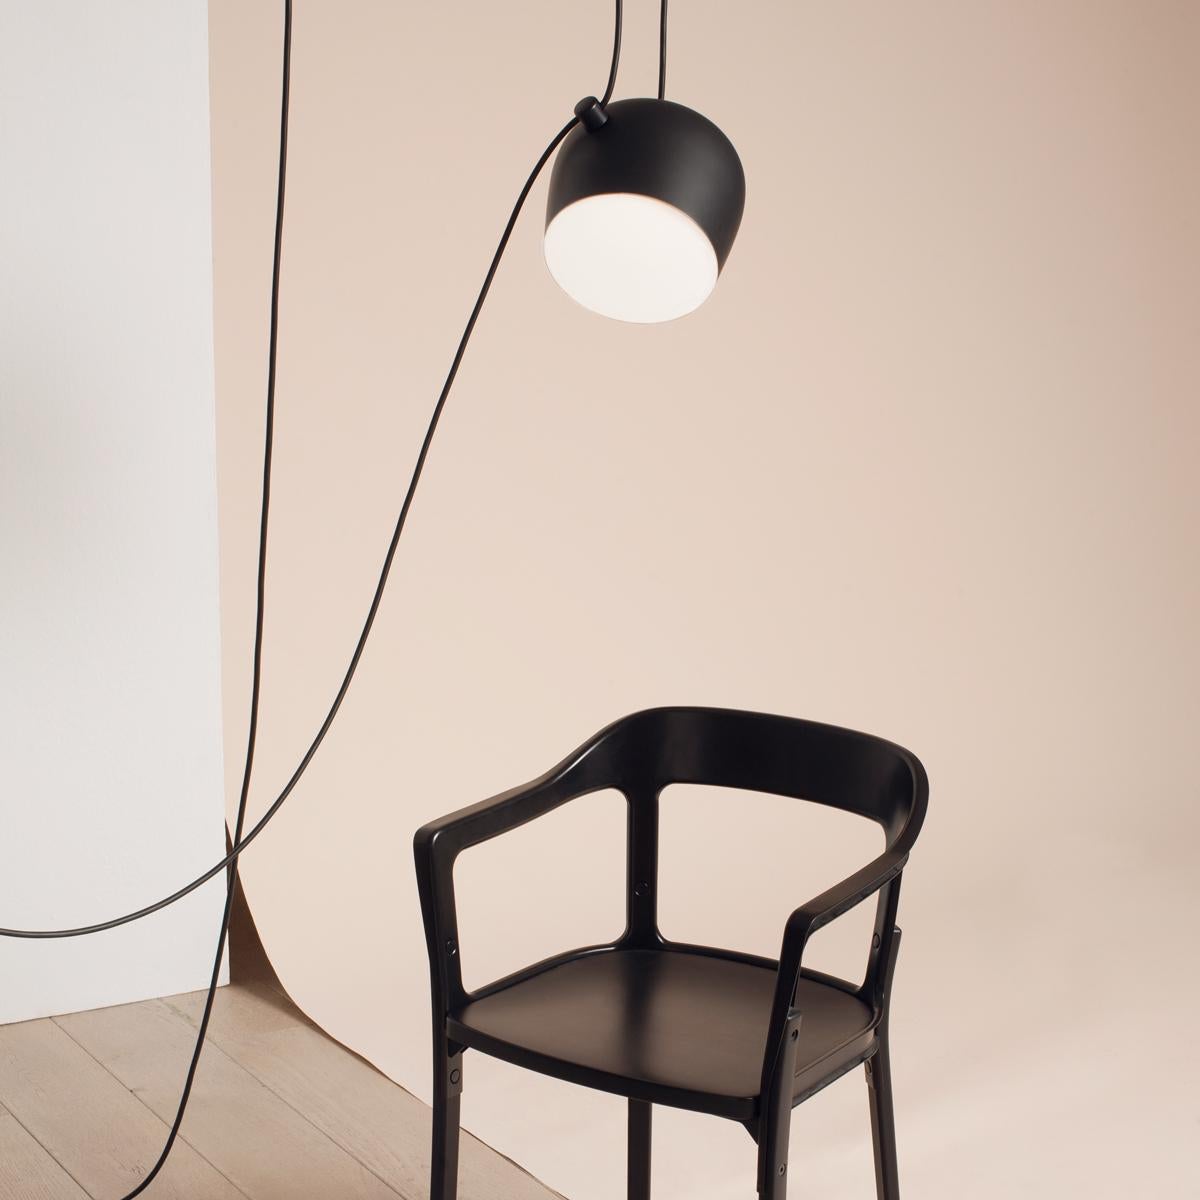 Italian Bouroullec Modern Black Hanging Aim Pendant Light for FLOS, in stock For Sale